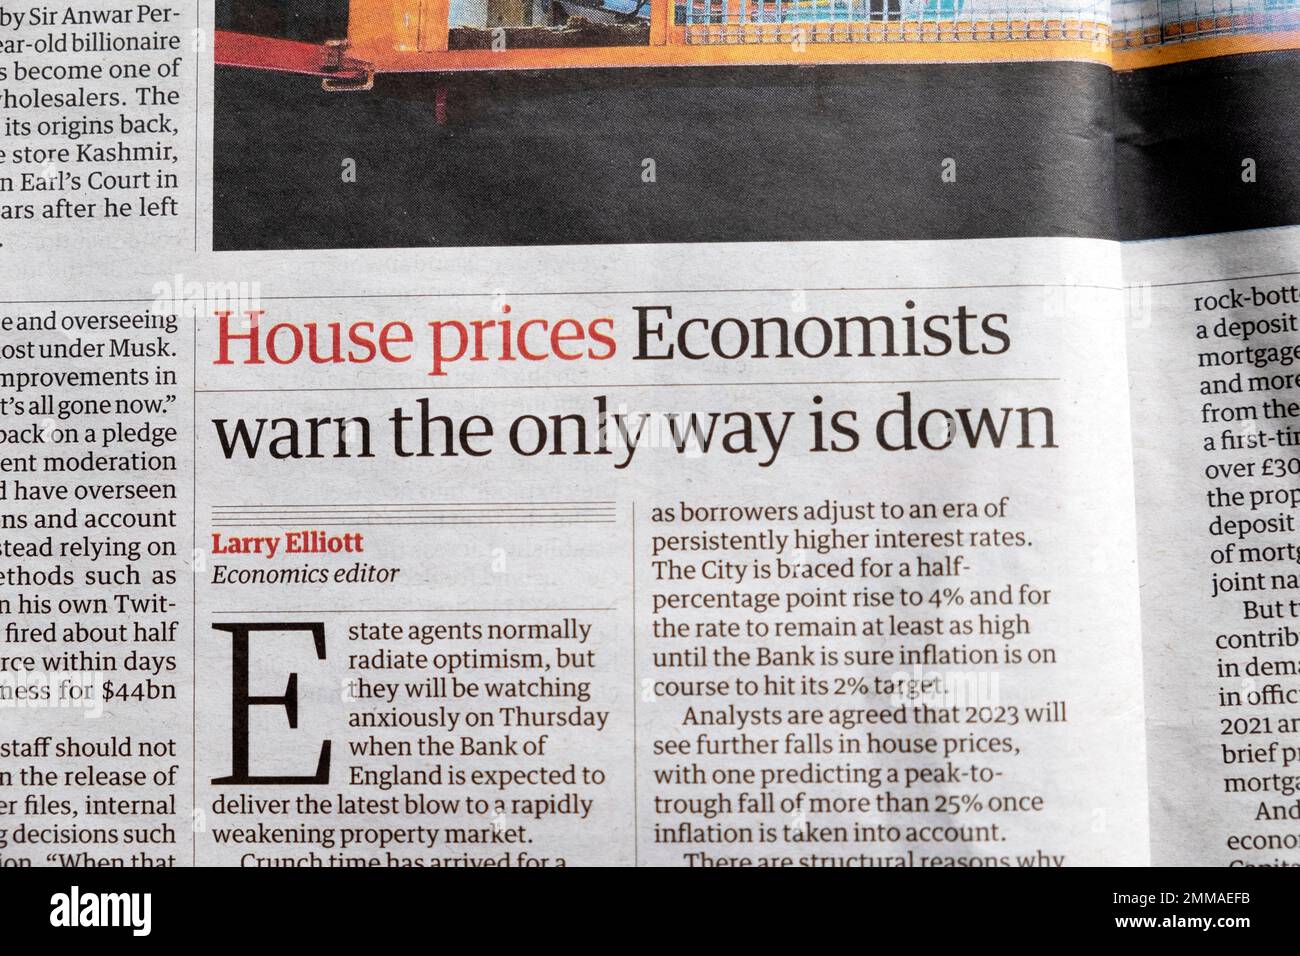 'House prices Economists warn the only way is down' Guardian newspaper headline housing market article clipping cutting 27 January 2023 City London UK Stock Photo